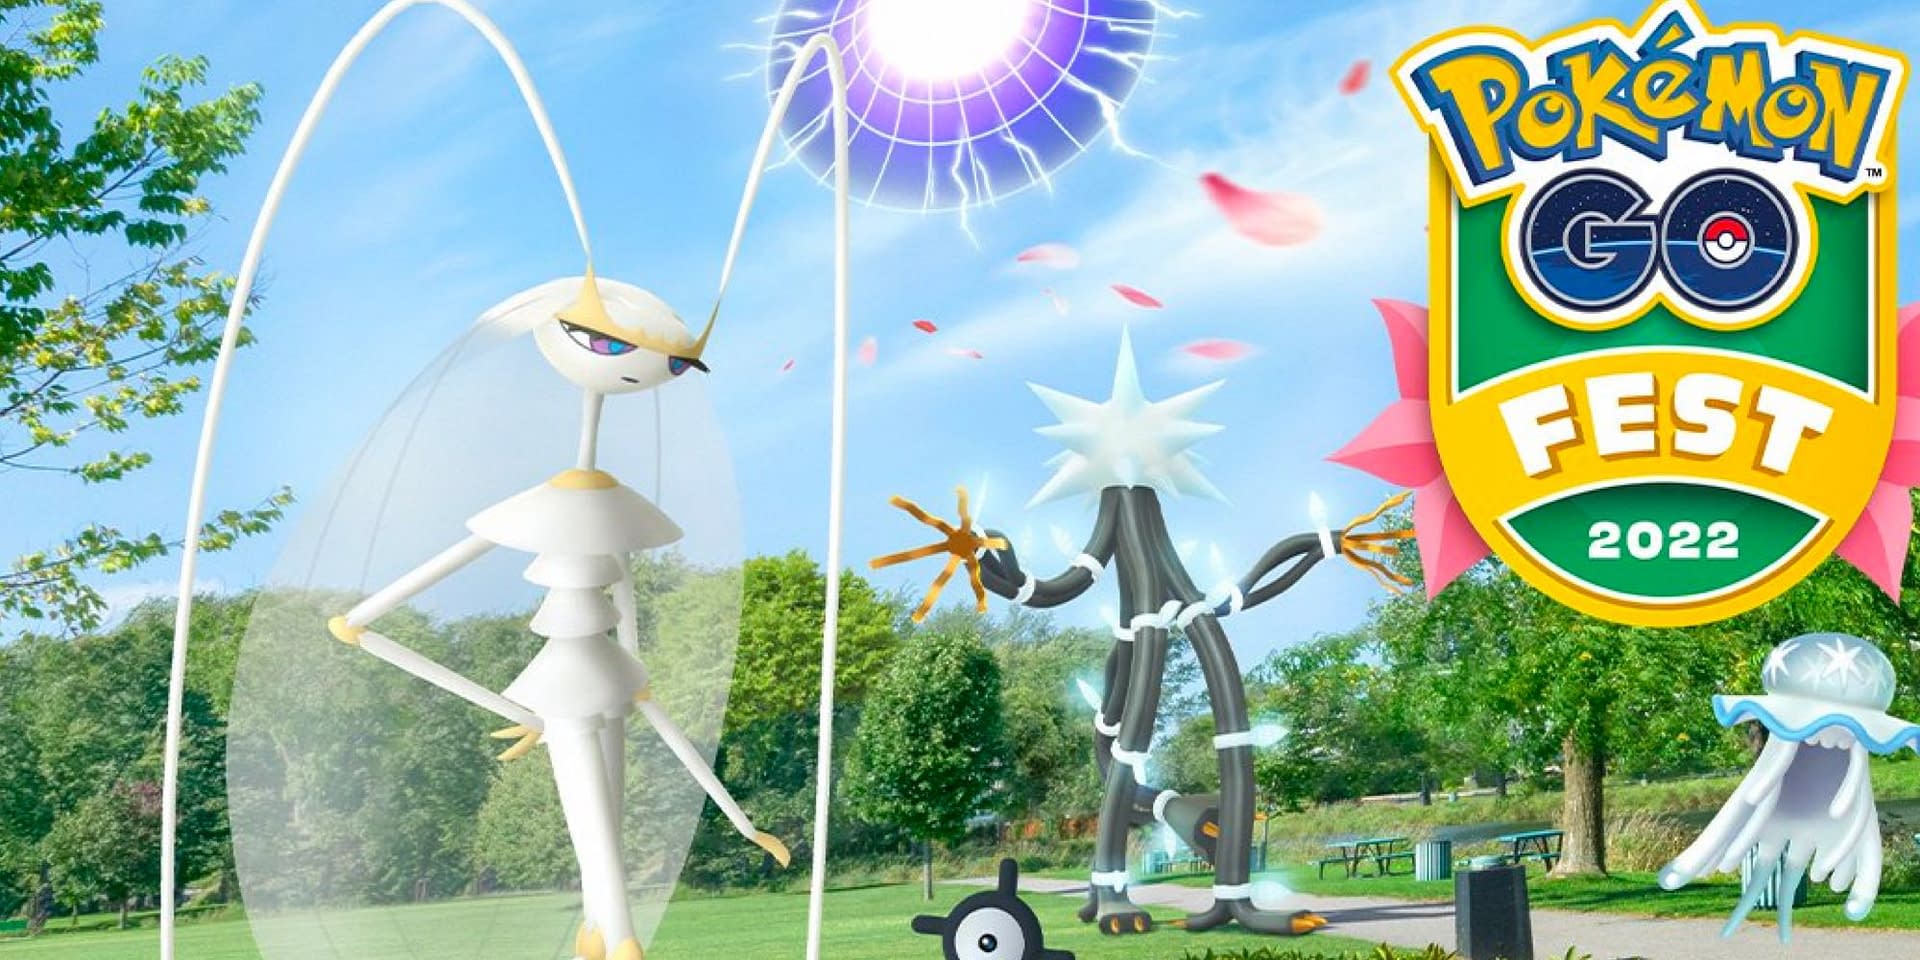 Pheromosa does not have shiny version for debut in Pokemon GO